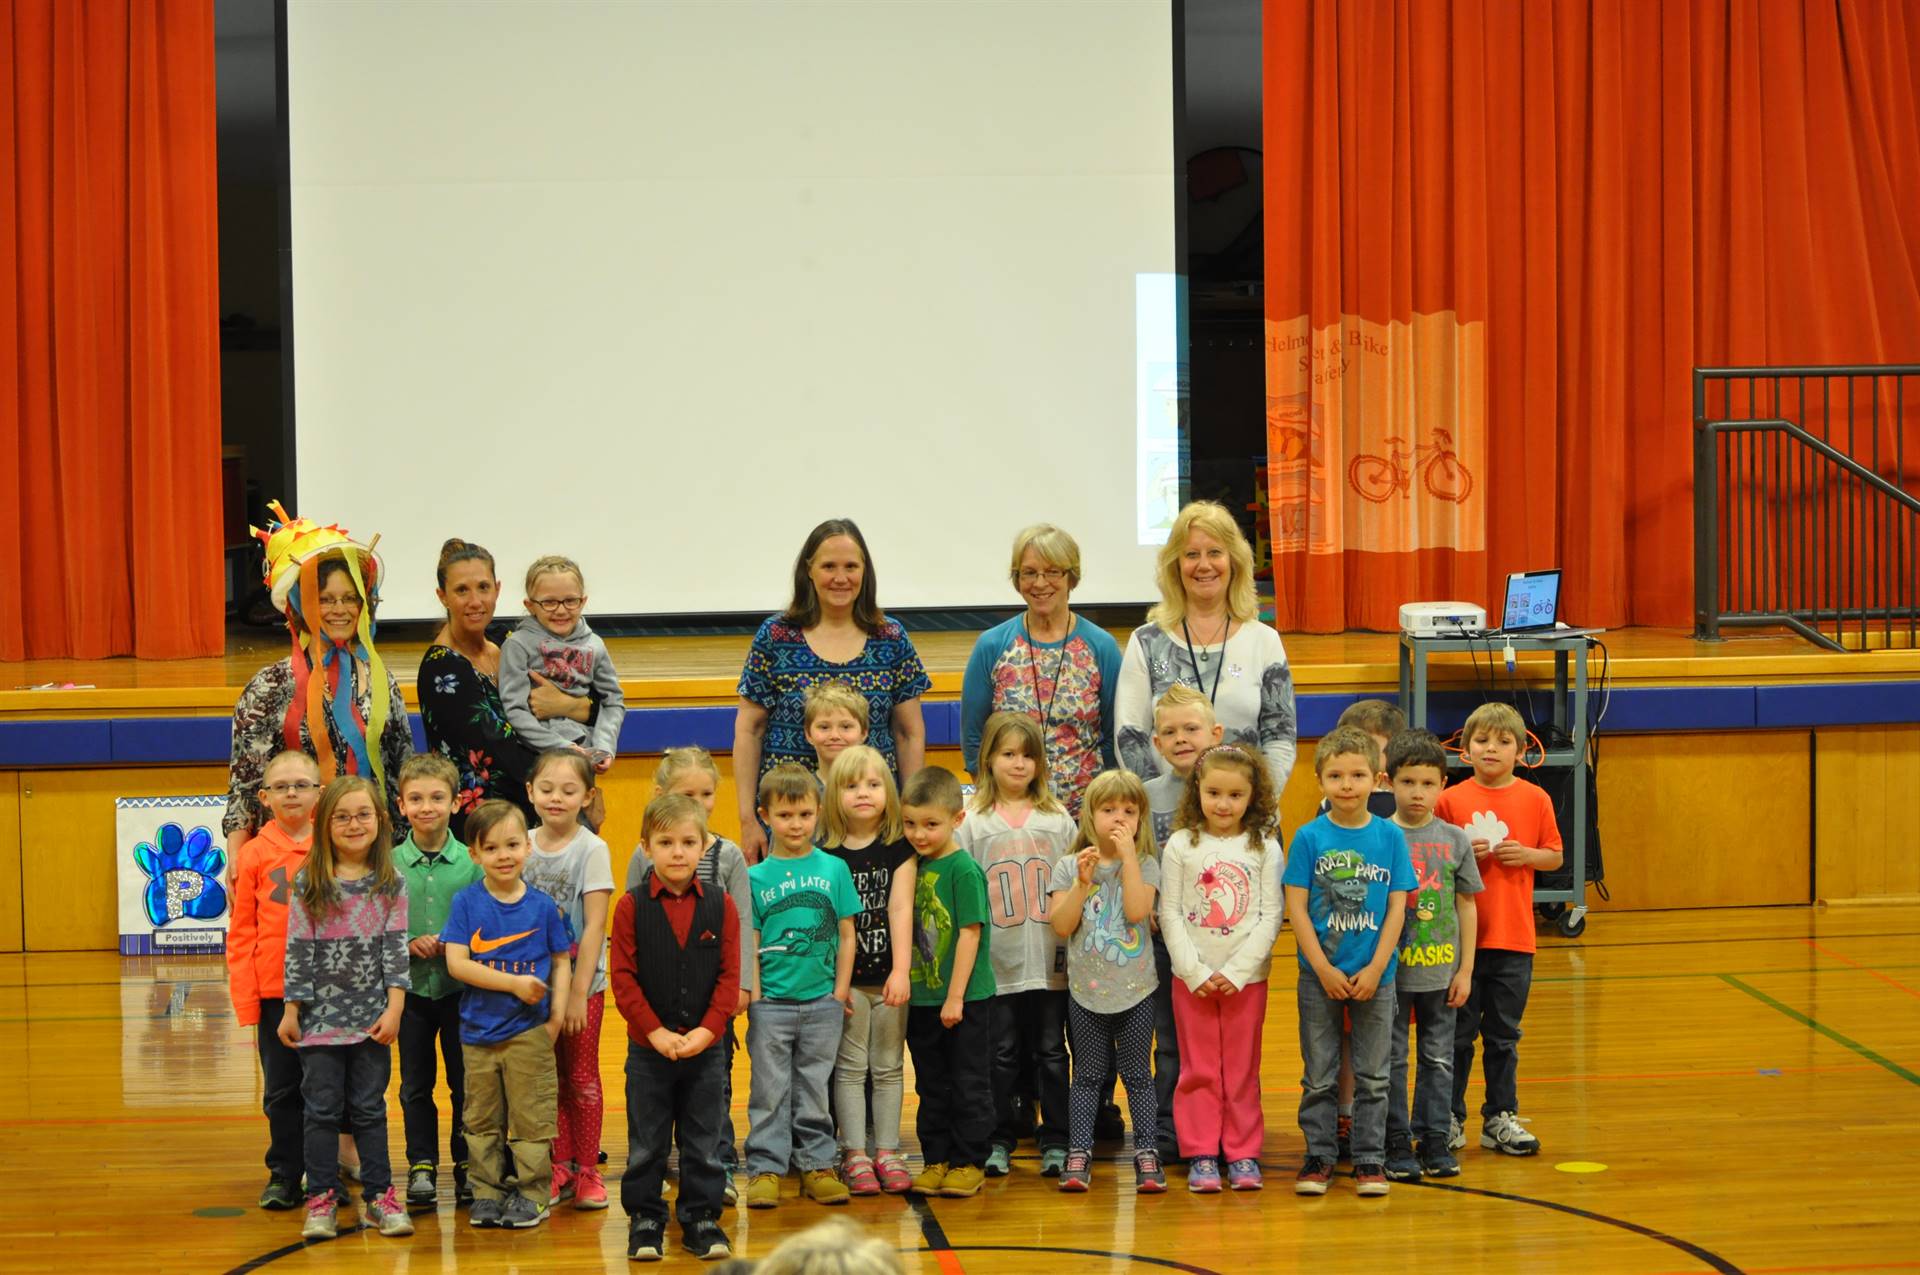  March and April birthdays celebrated at PAWS assembly!